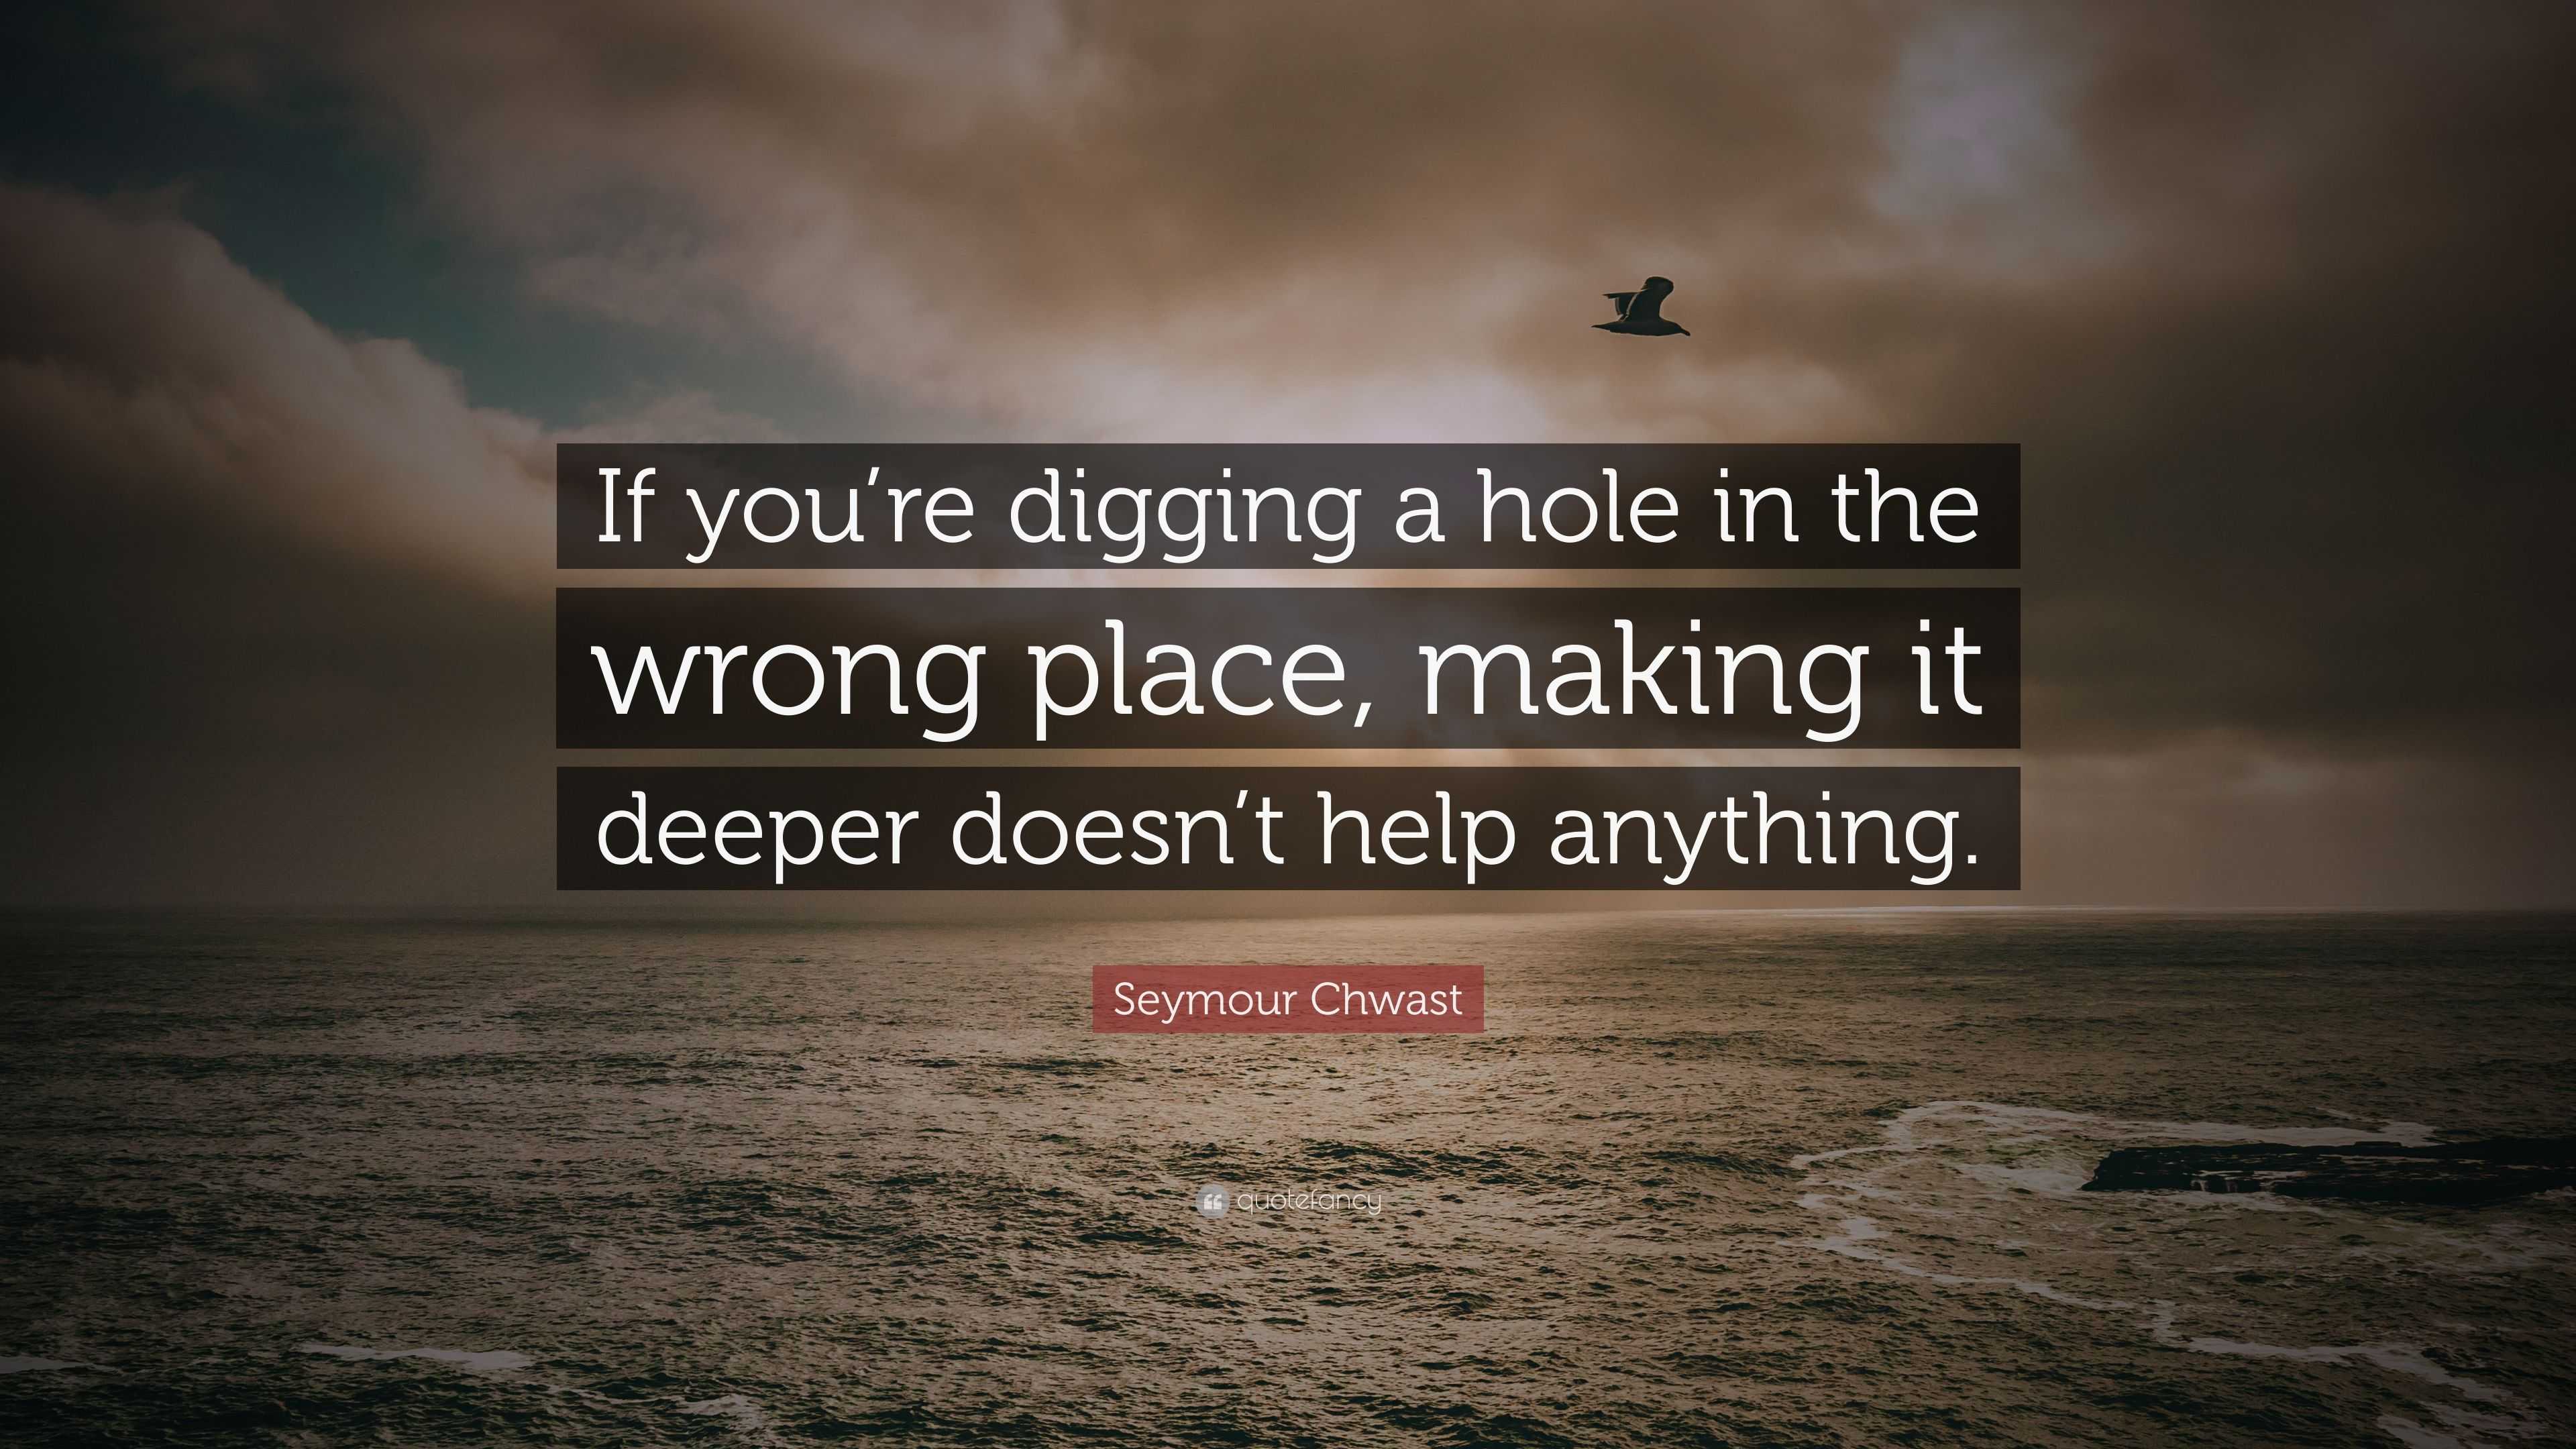 Seymour Chwast Quote “If you’re digging a hole in the wrong place